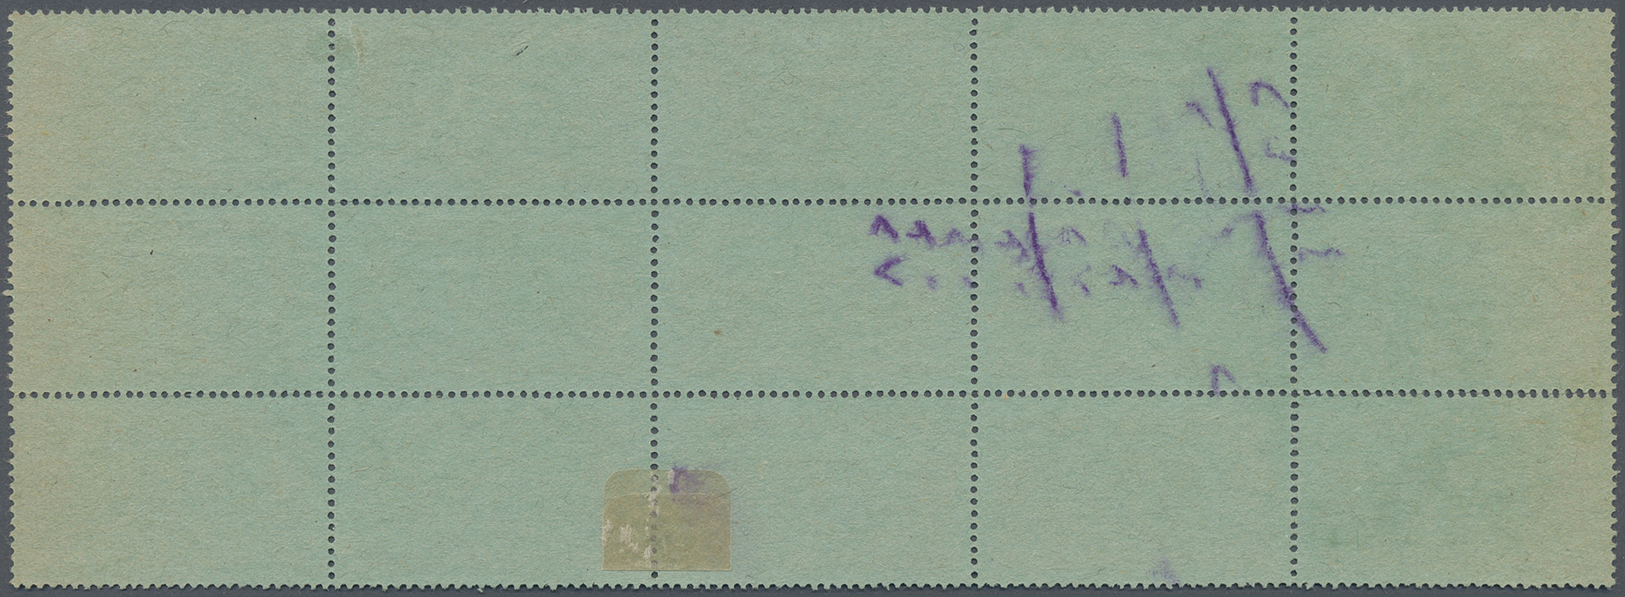 O Libanon - Portomarken: 1925, 5pi. Black On Green, Used Block Of 15 Stamps, Partly Separated And Ink Marks On Reverse. - Libano